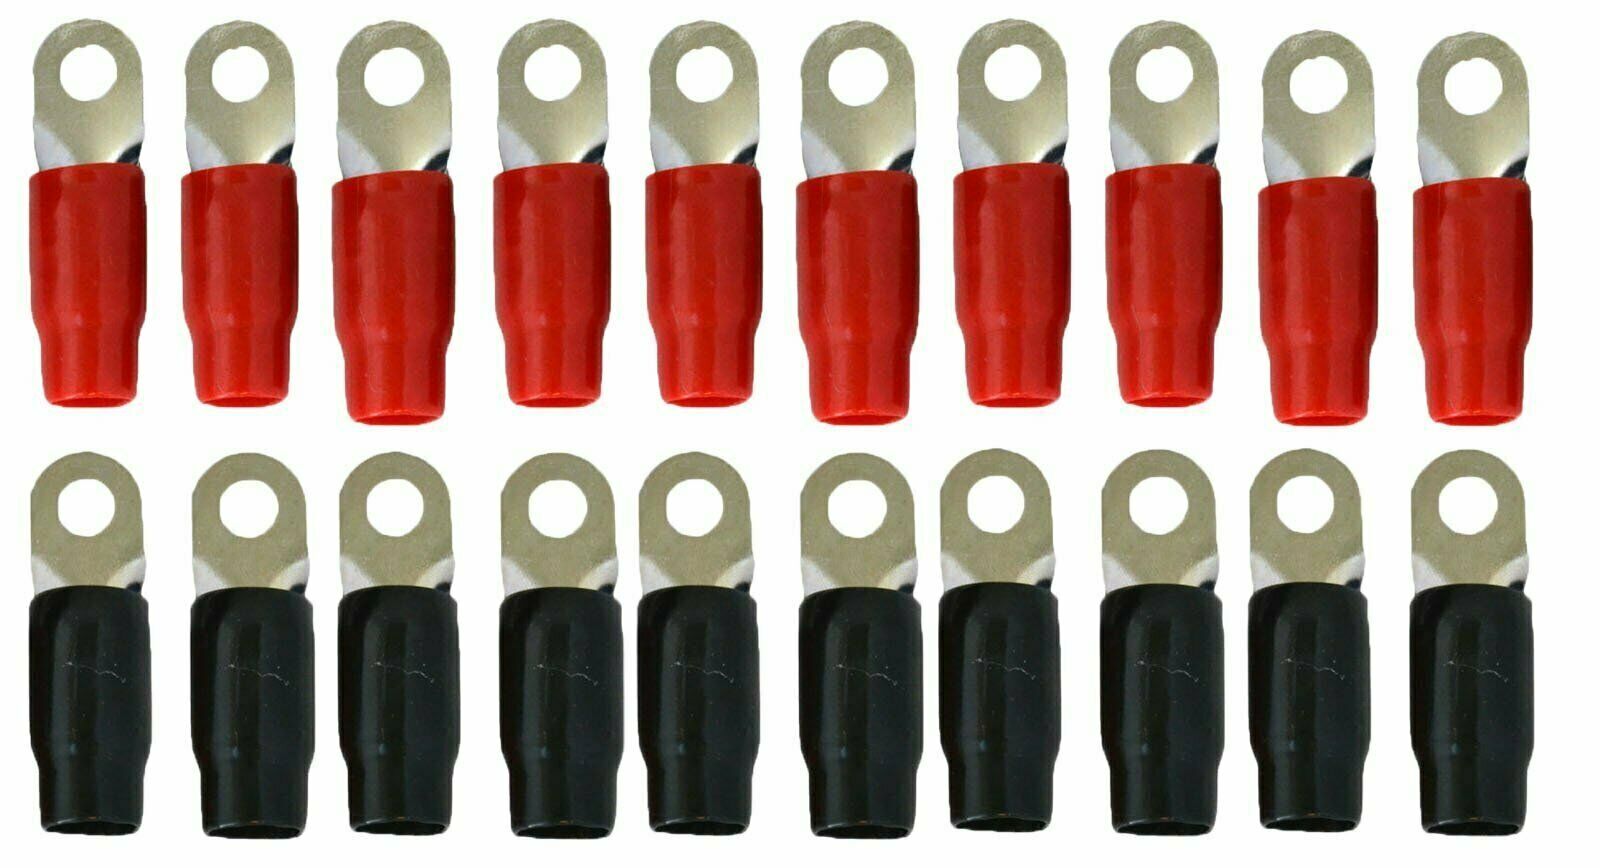 SoundBox 0 Gauge Ring Terminal 20 Pack For 1/0 AWG Wire - Red/Black Boots- 5/16